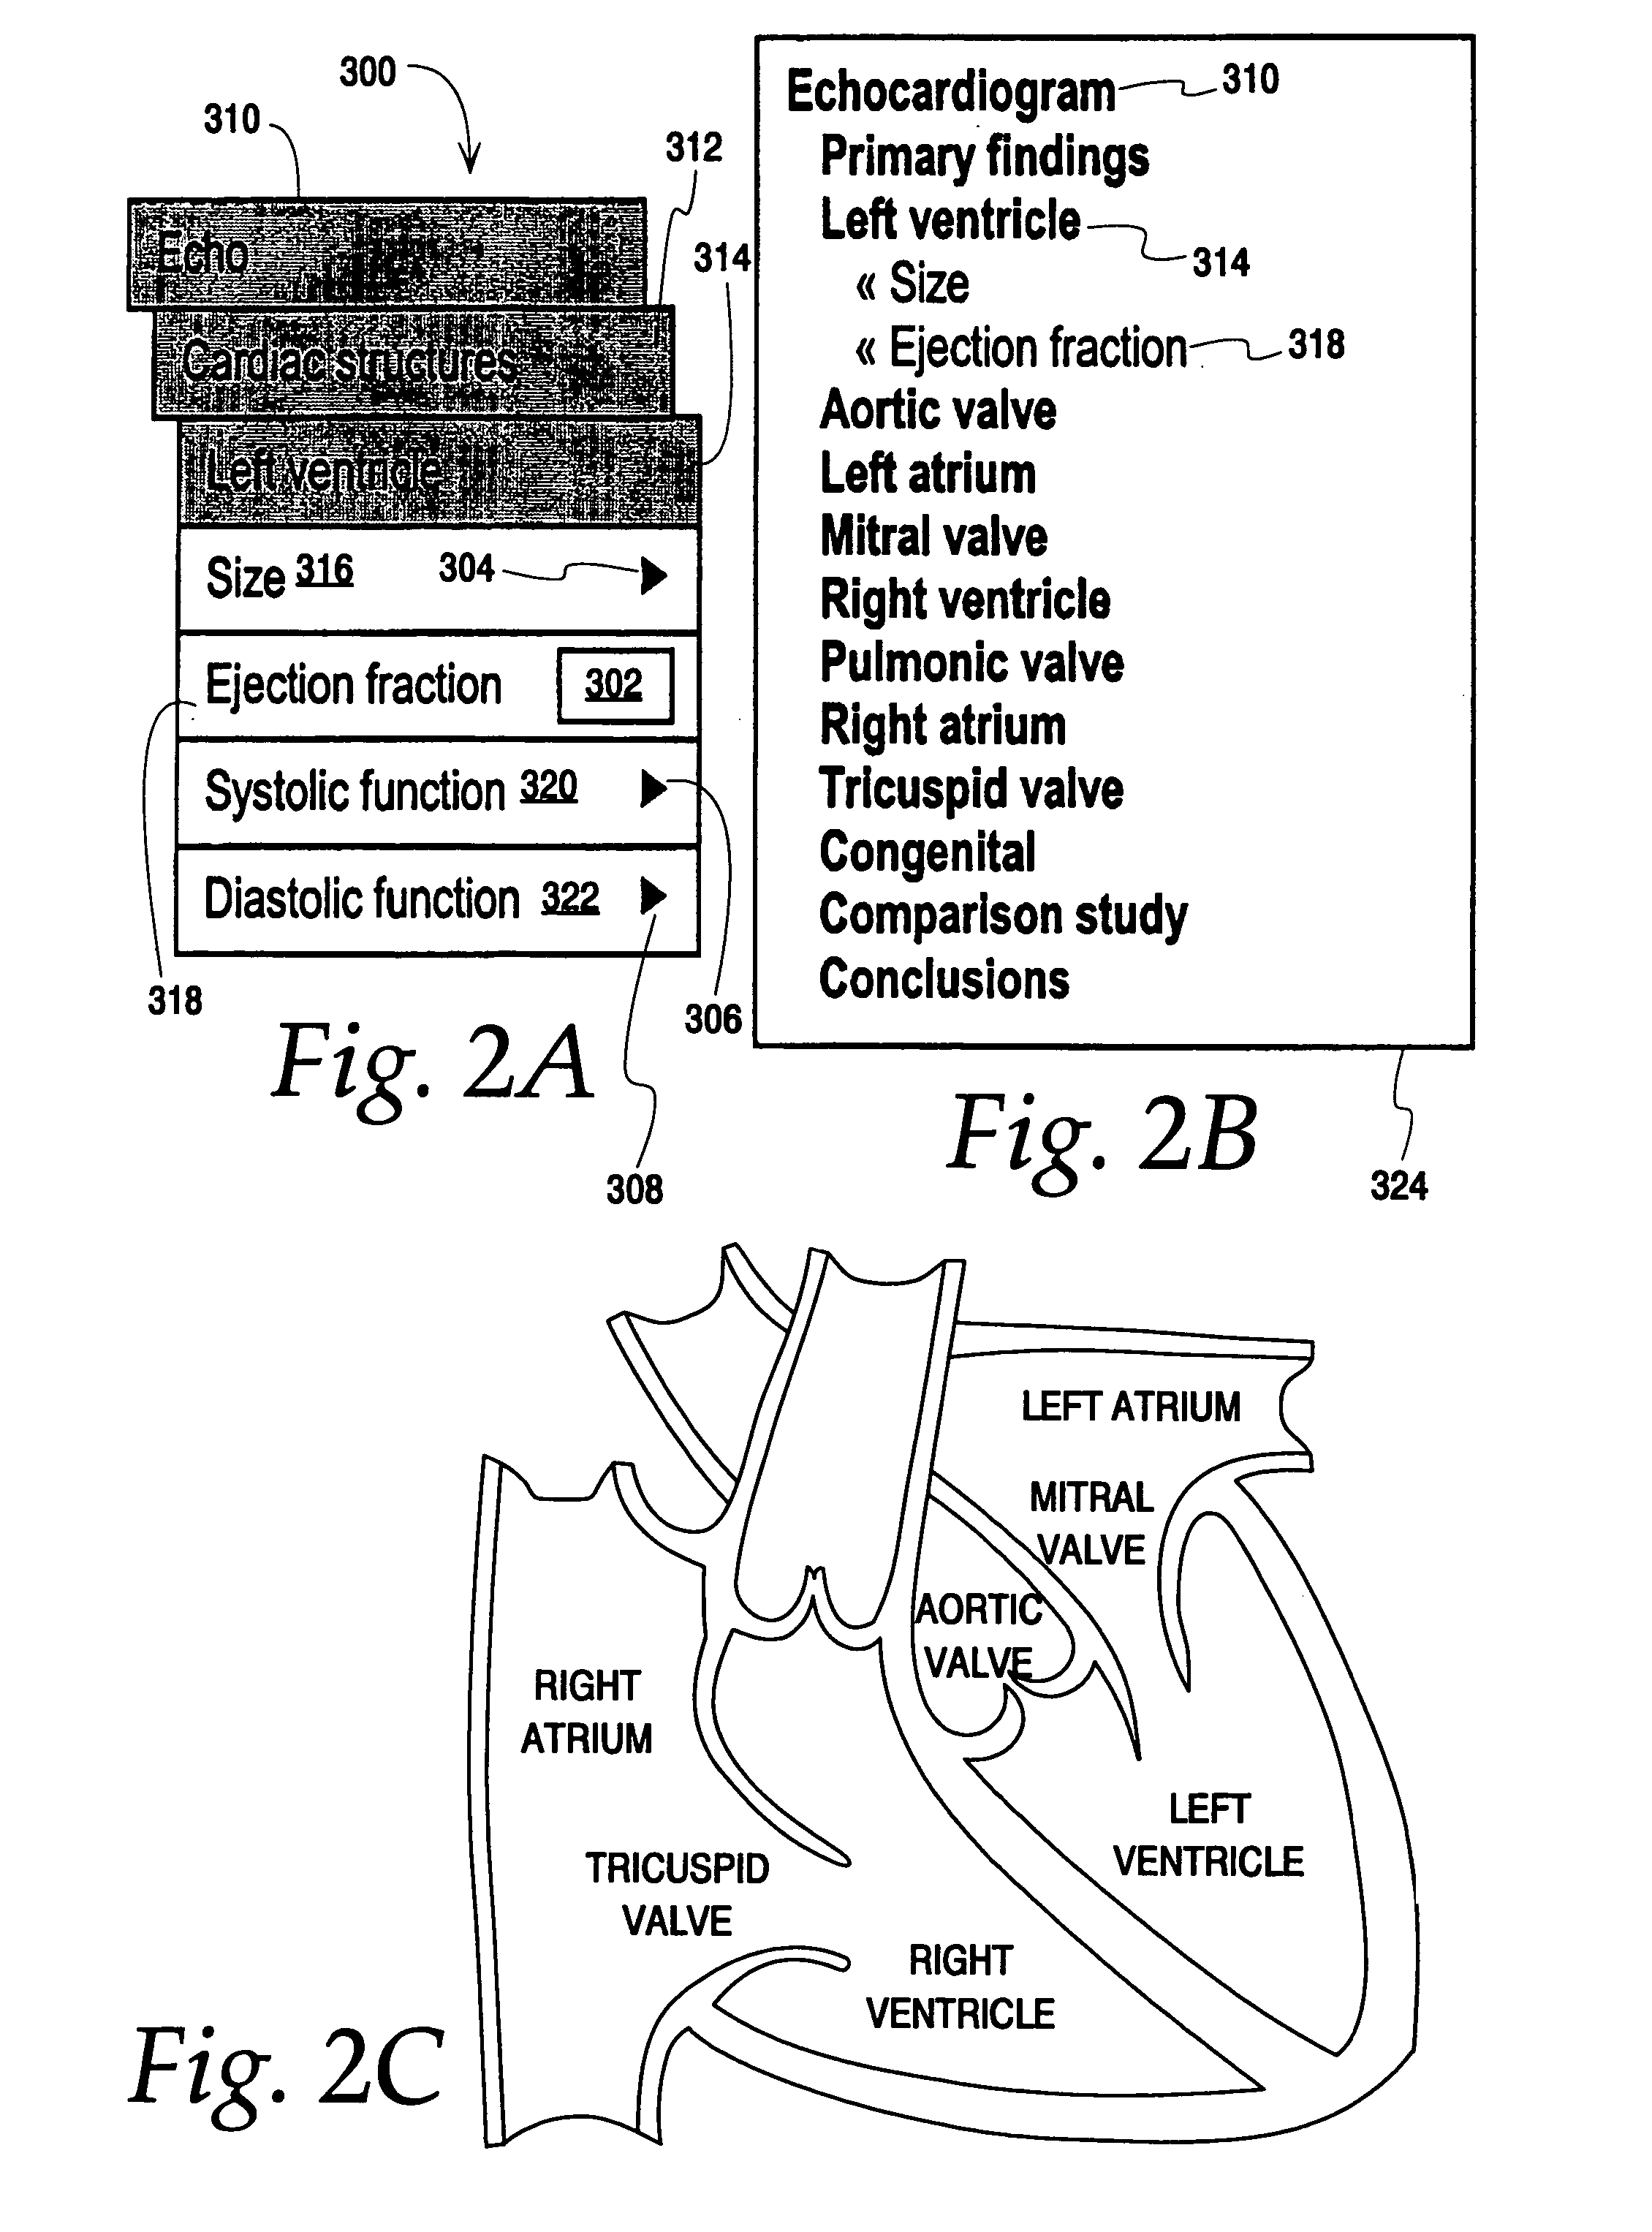 Method and system for generation of medical reports from data in a hierarchically-organized database